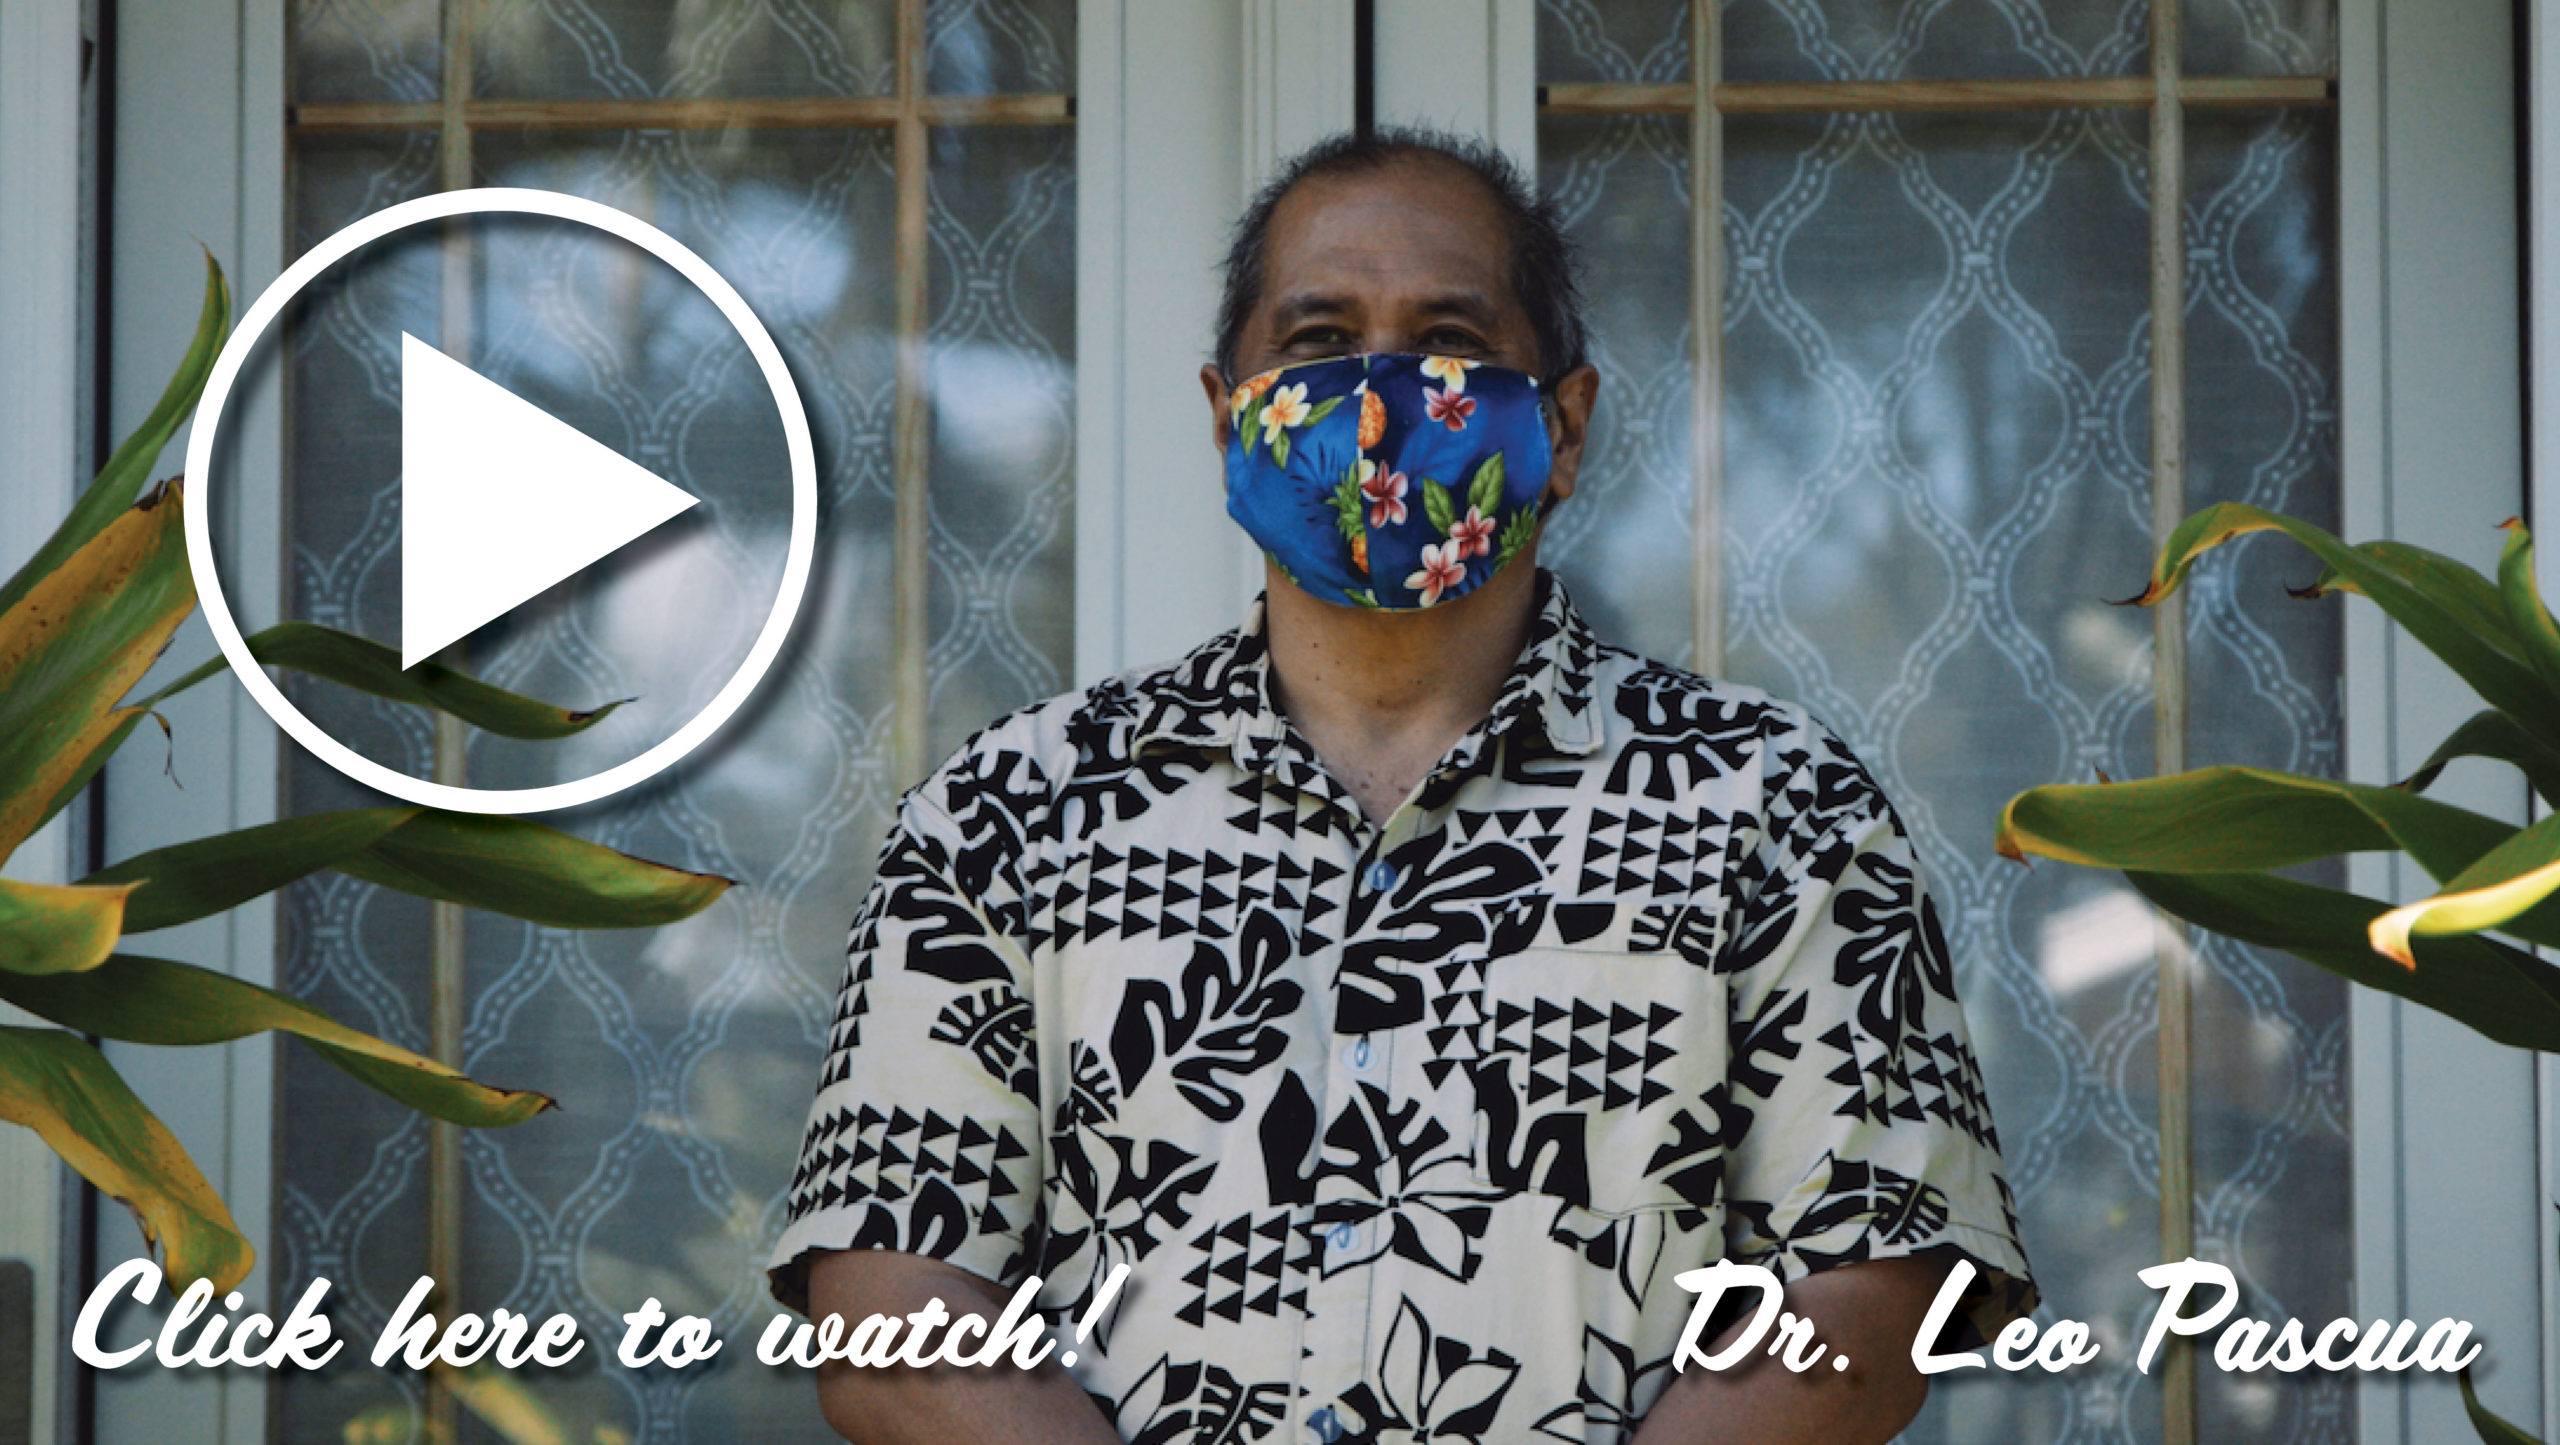 Video featuring Dr. Leo Pascua